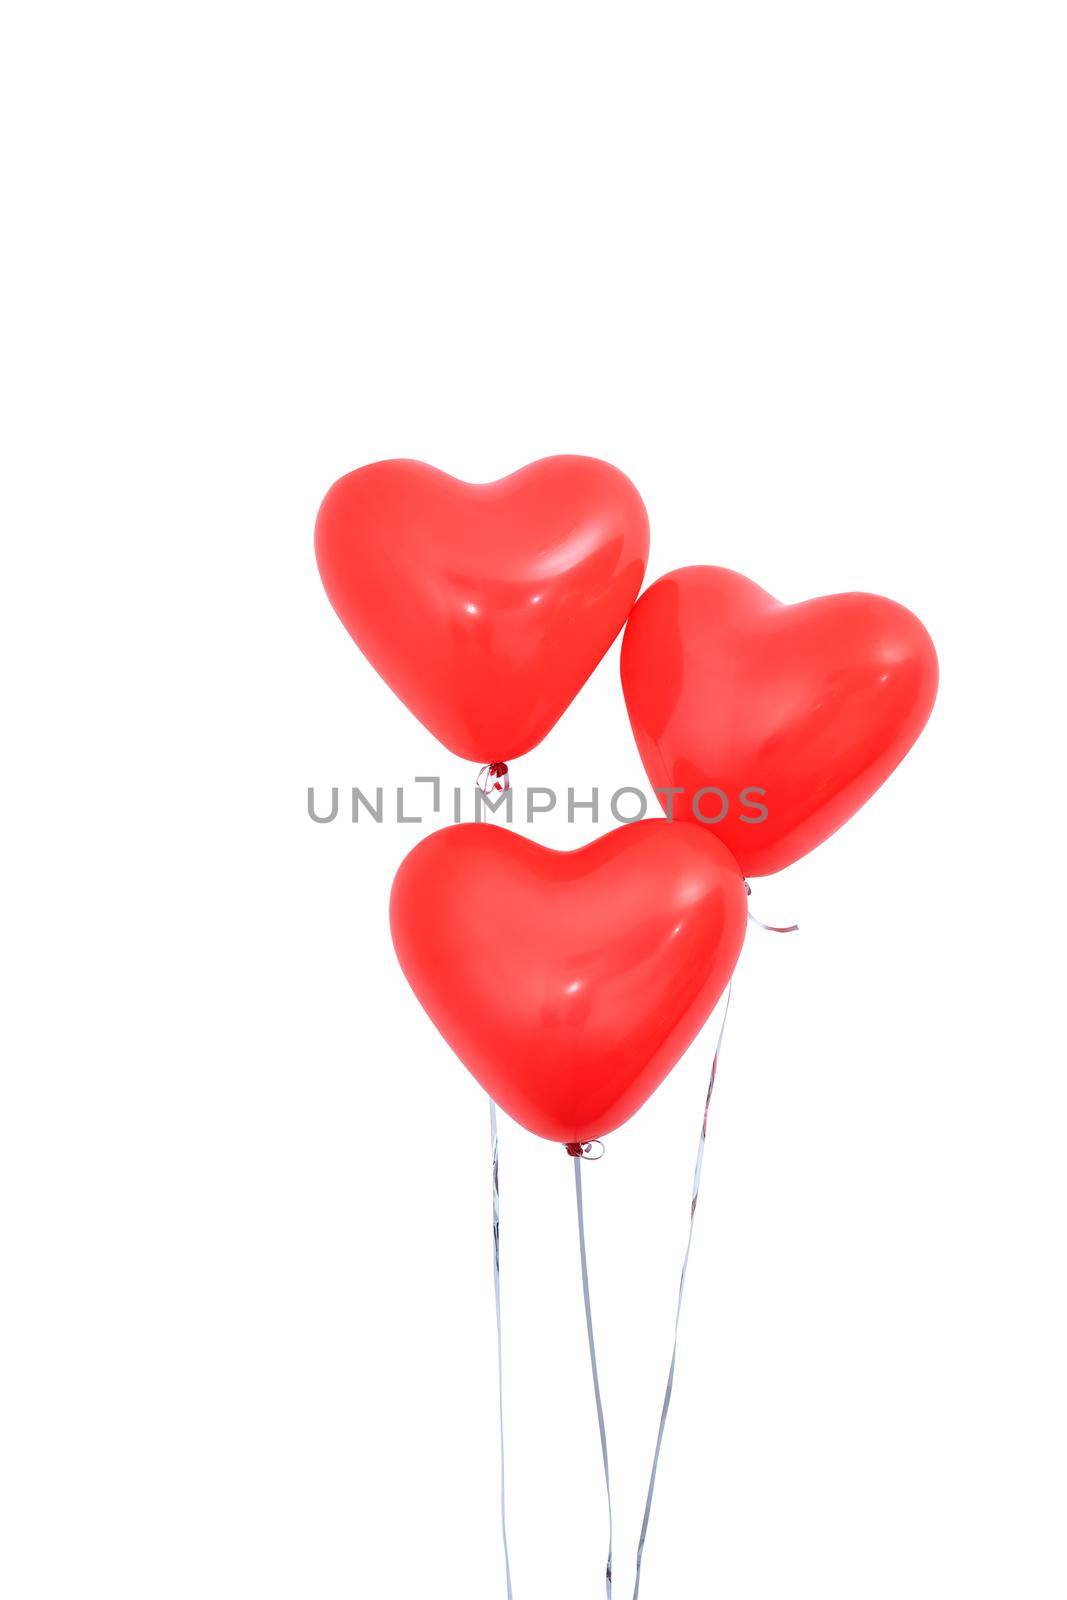 Red heart shaped helium balloon isolated on white background with ropes, Valentine's day, Mother's day, birthday party design concept. Clipping path.